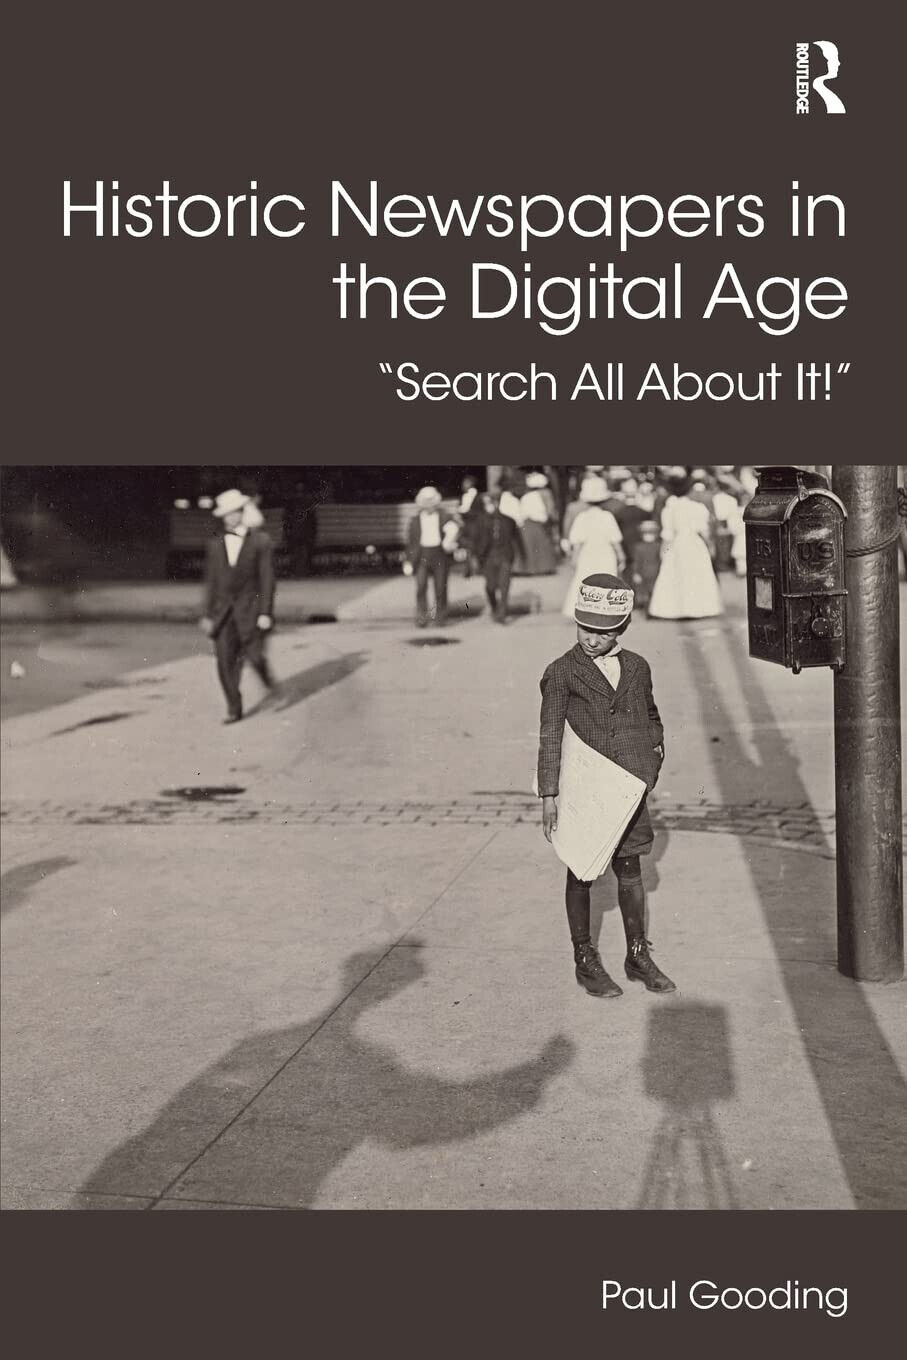 Historic Newspapers in the Digital Age - Paul - Routledge, 2018 libro usato